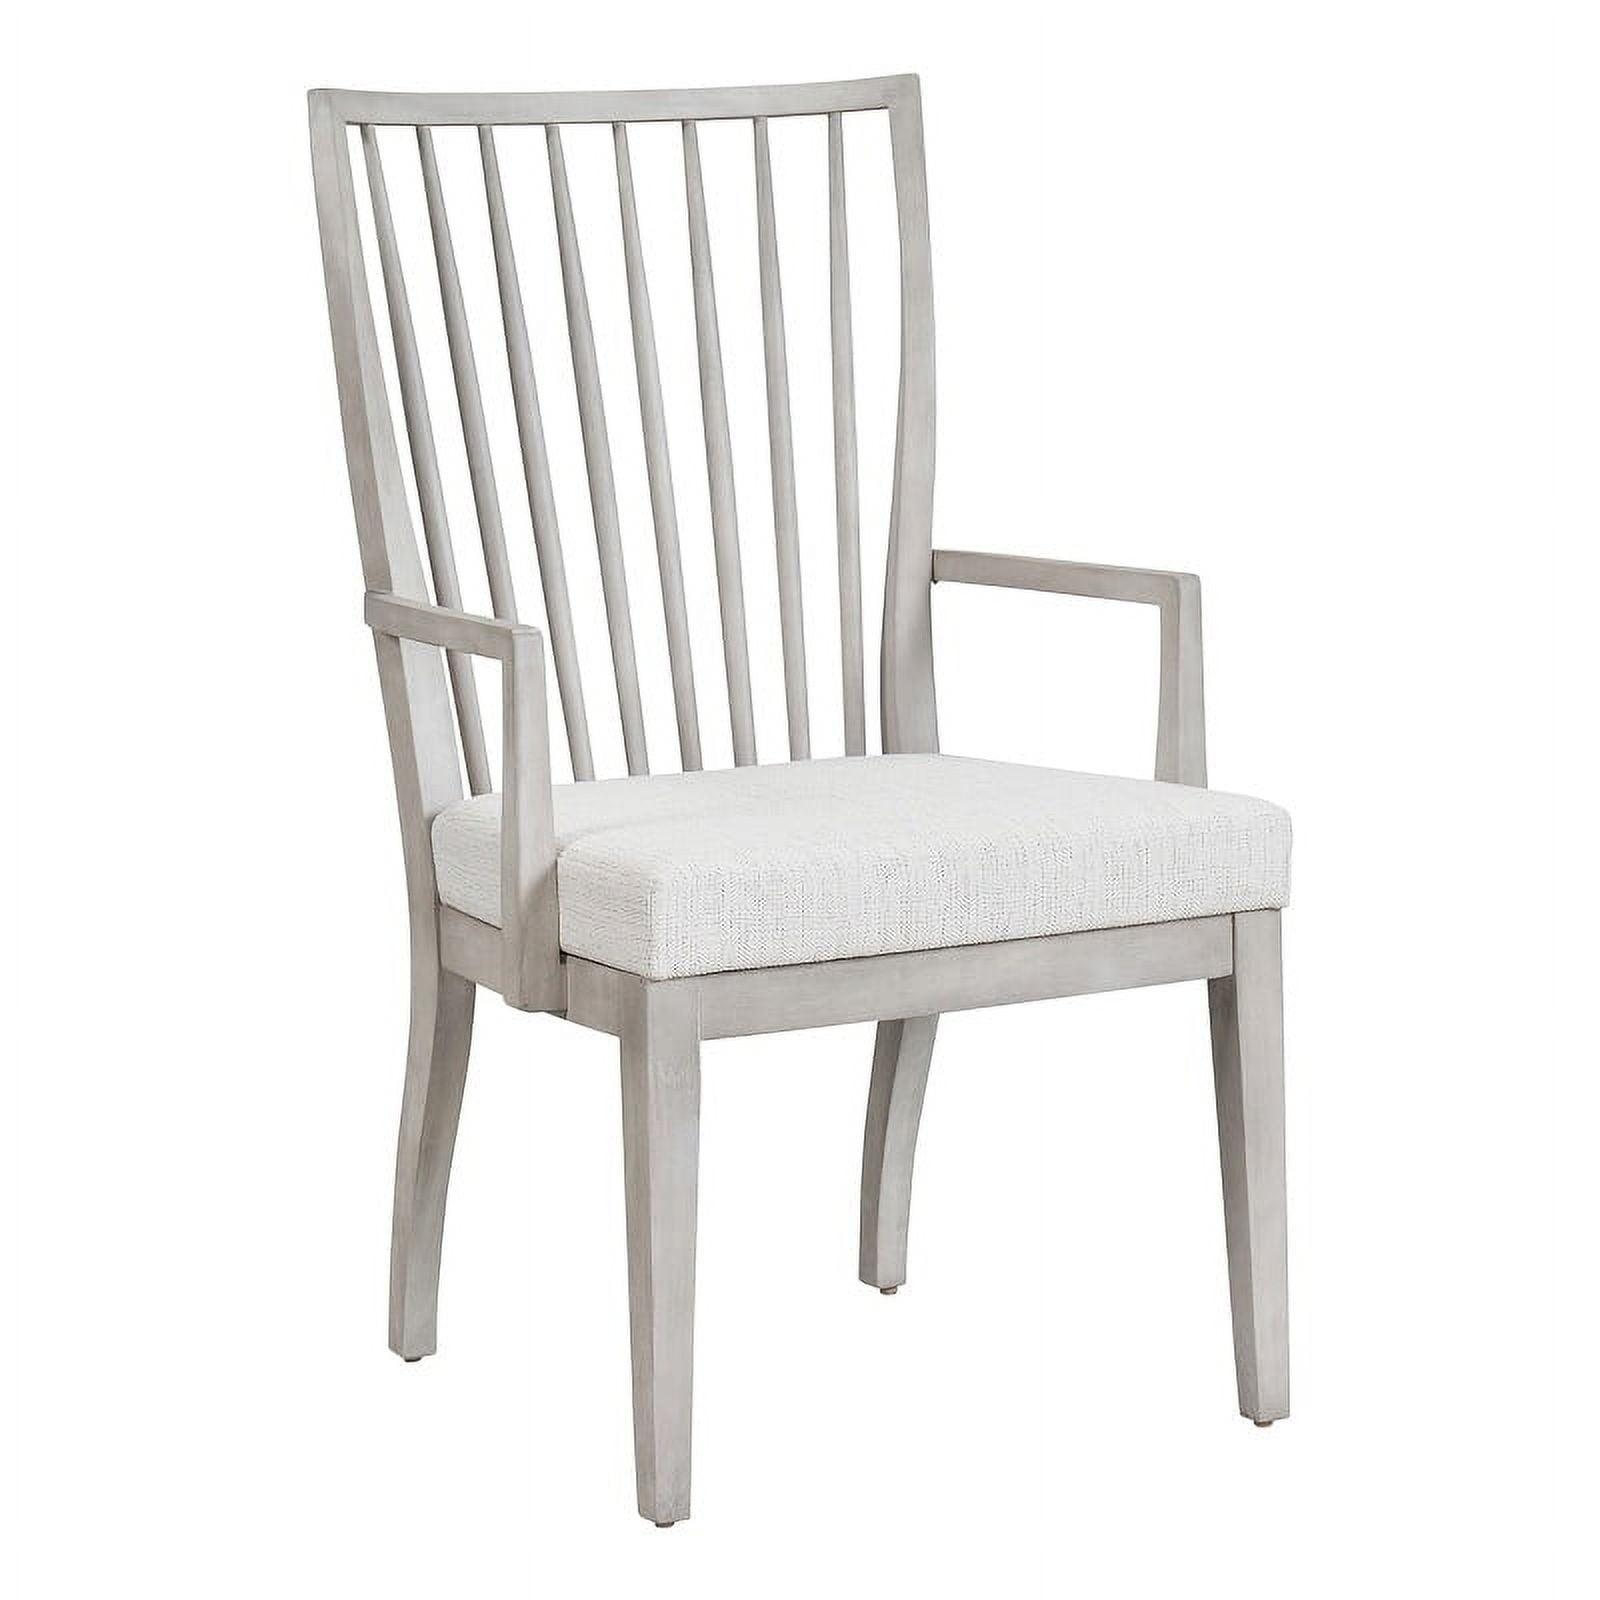 Set of 2 Weathered Grey Birch and Oak Wood Bowen Arm Chairs